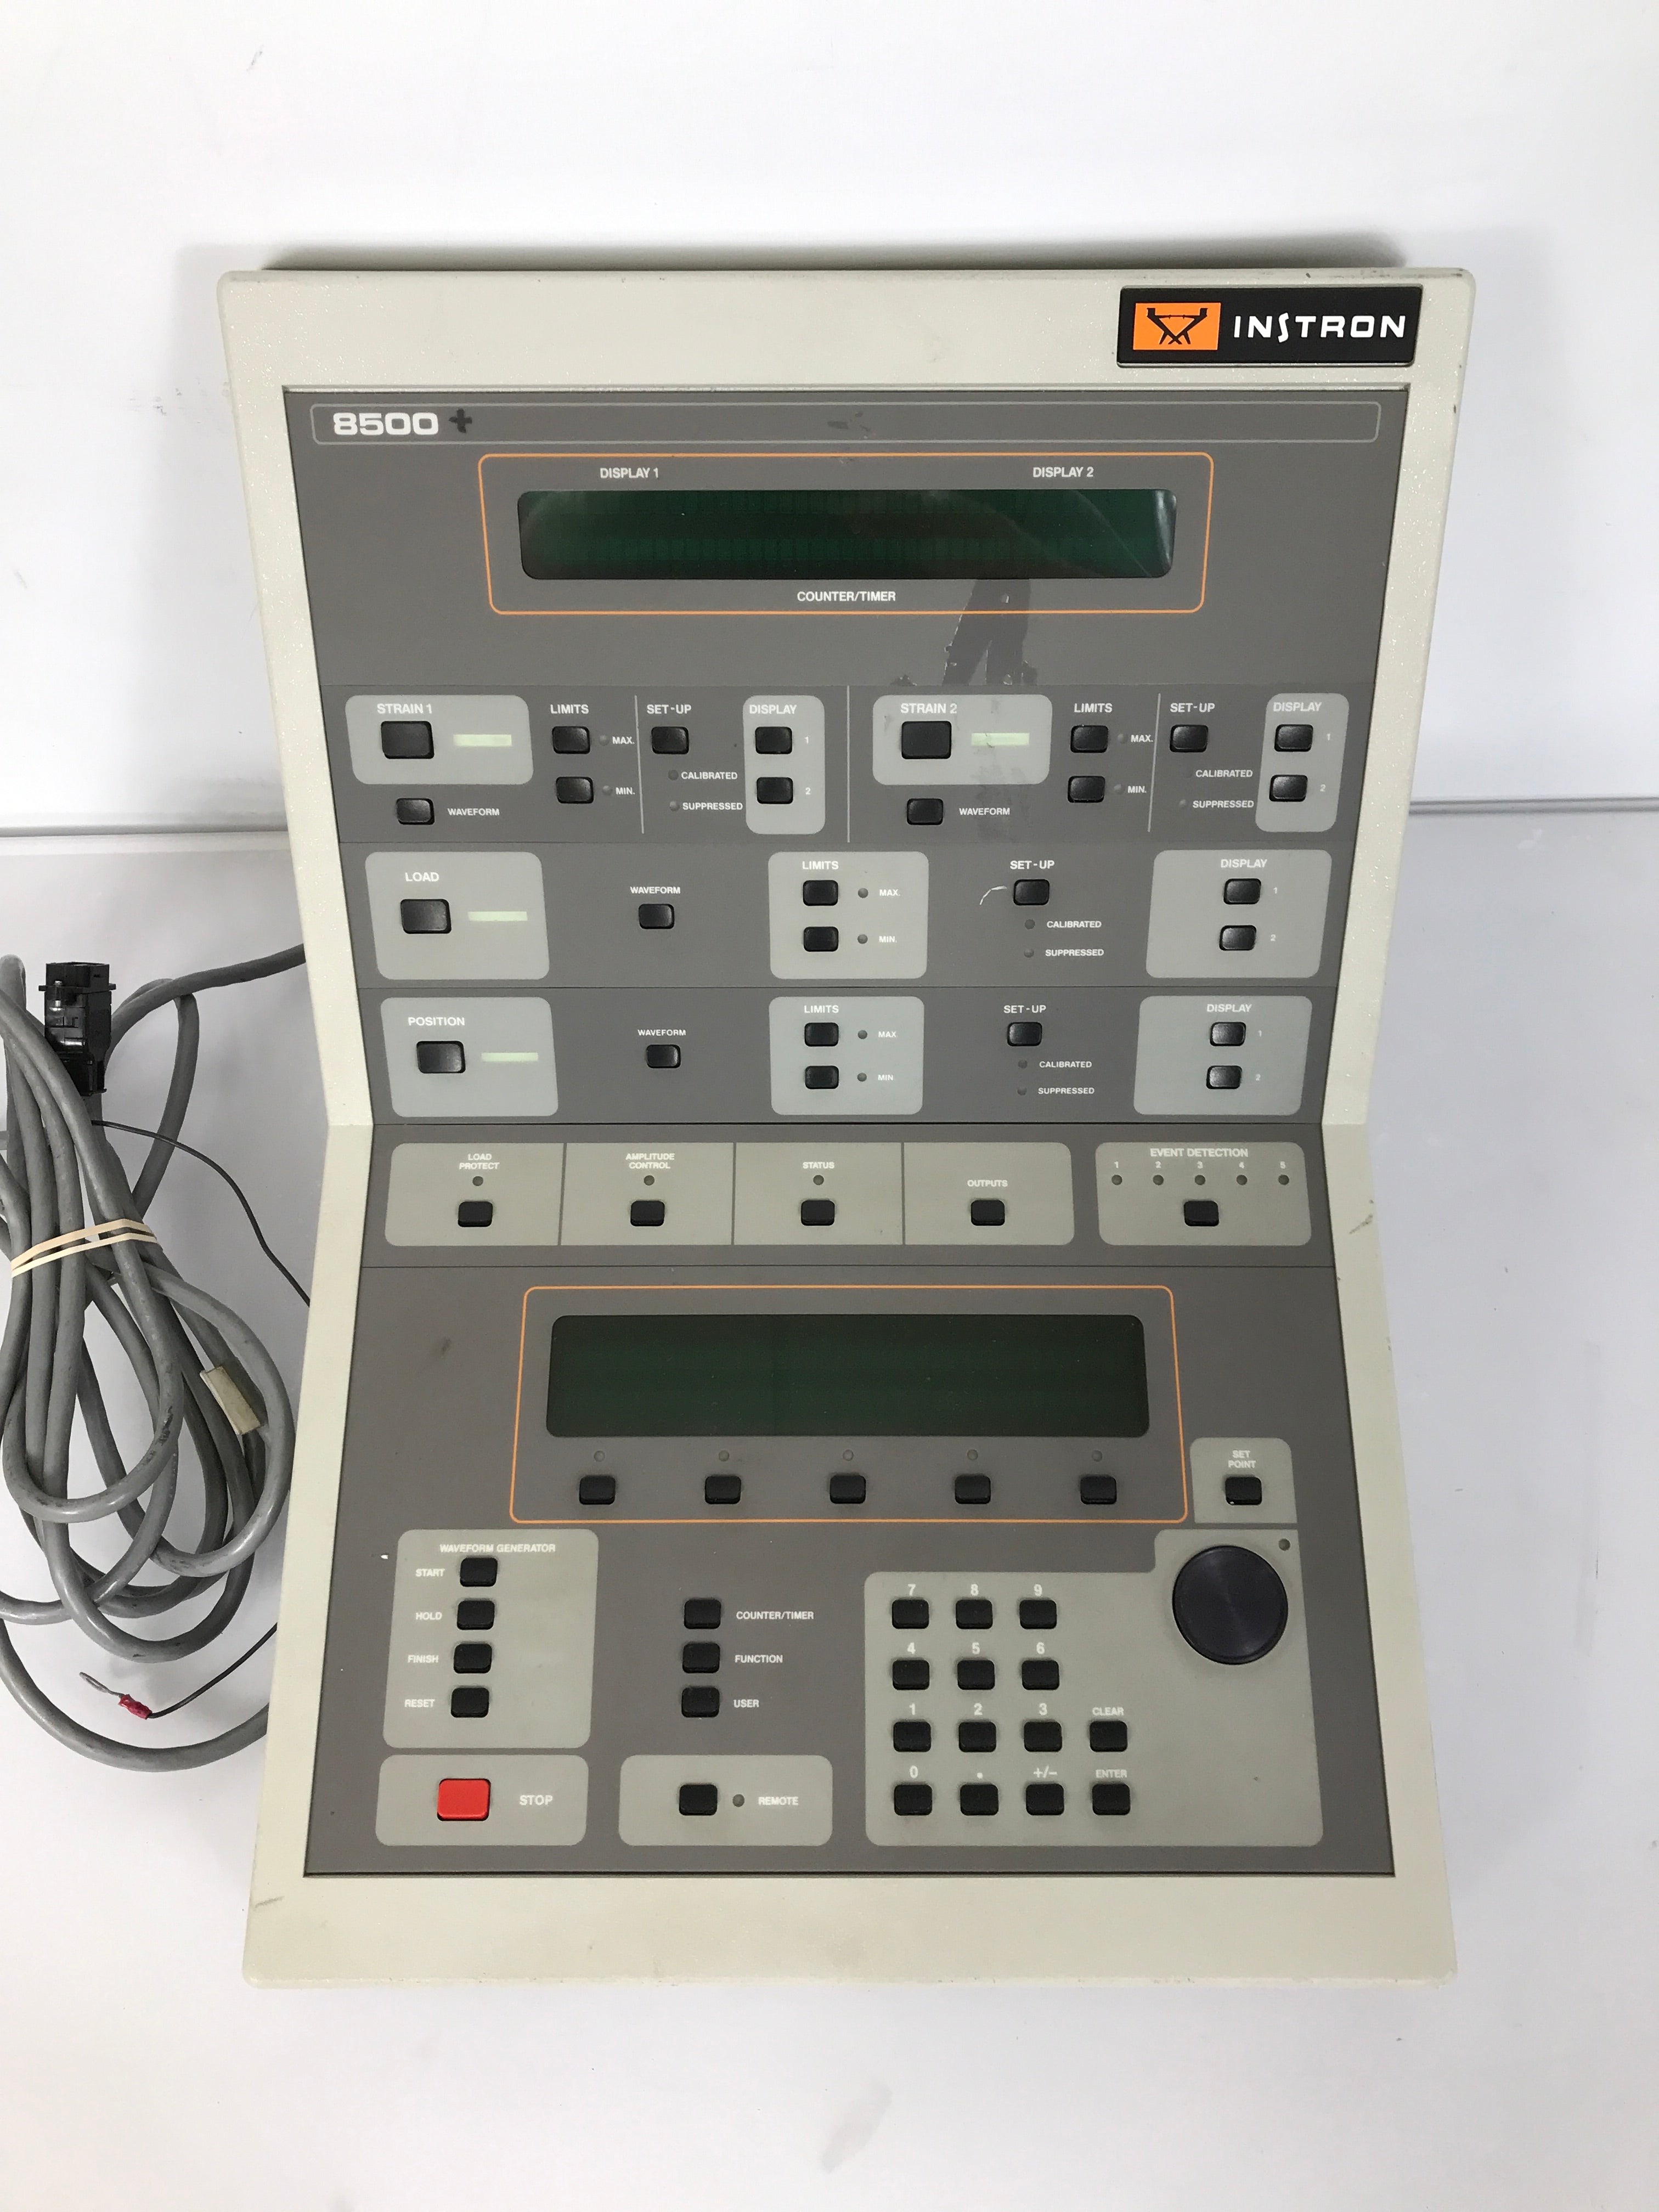 Instron 8500 Control Panel 12.5 Firmware *For Parts or Repair*